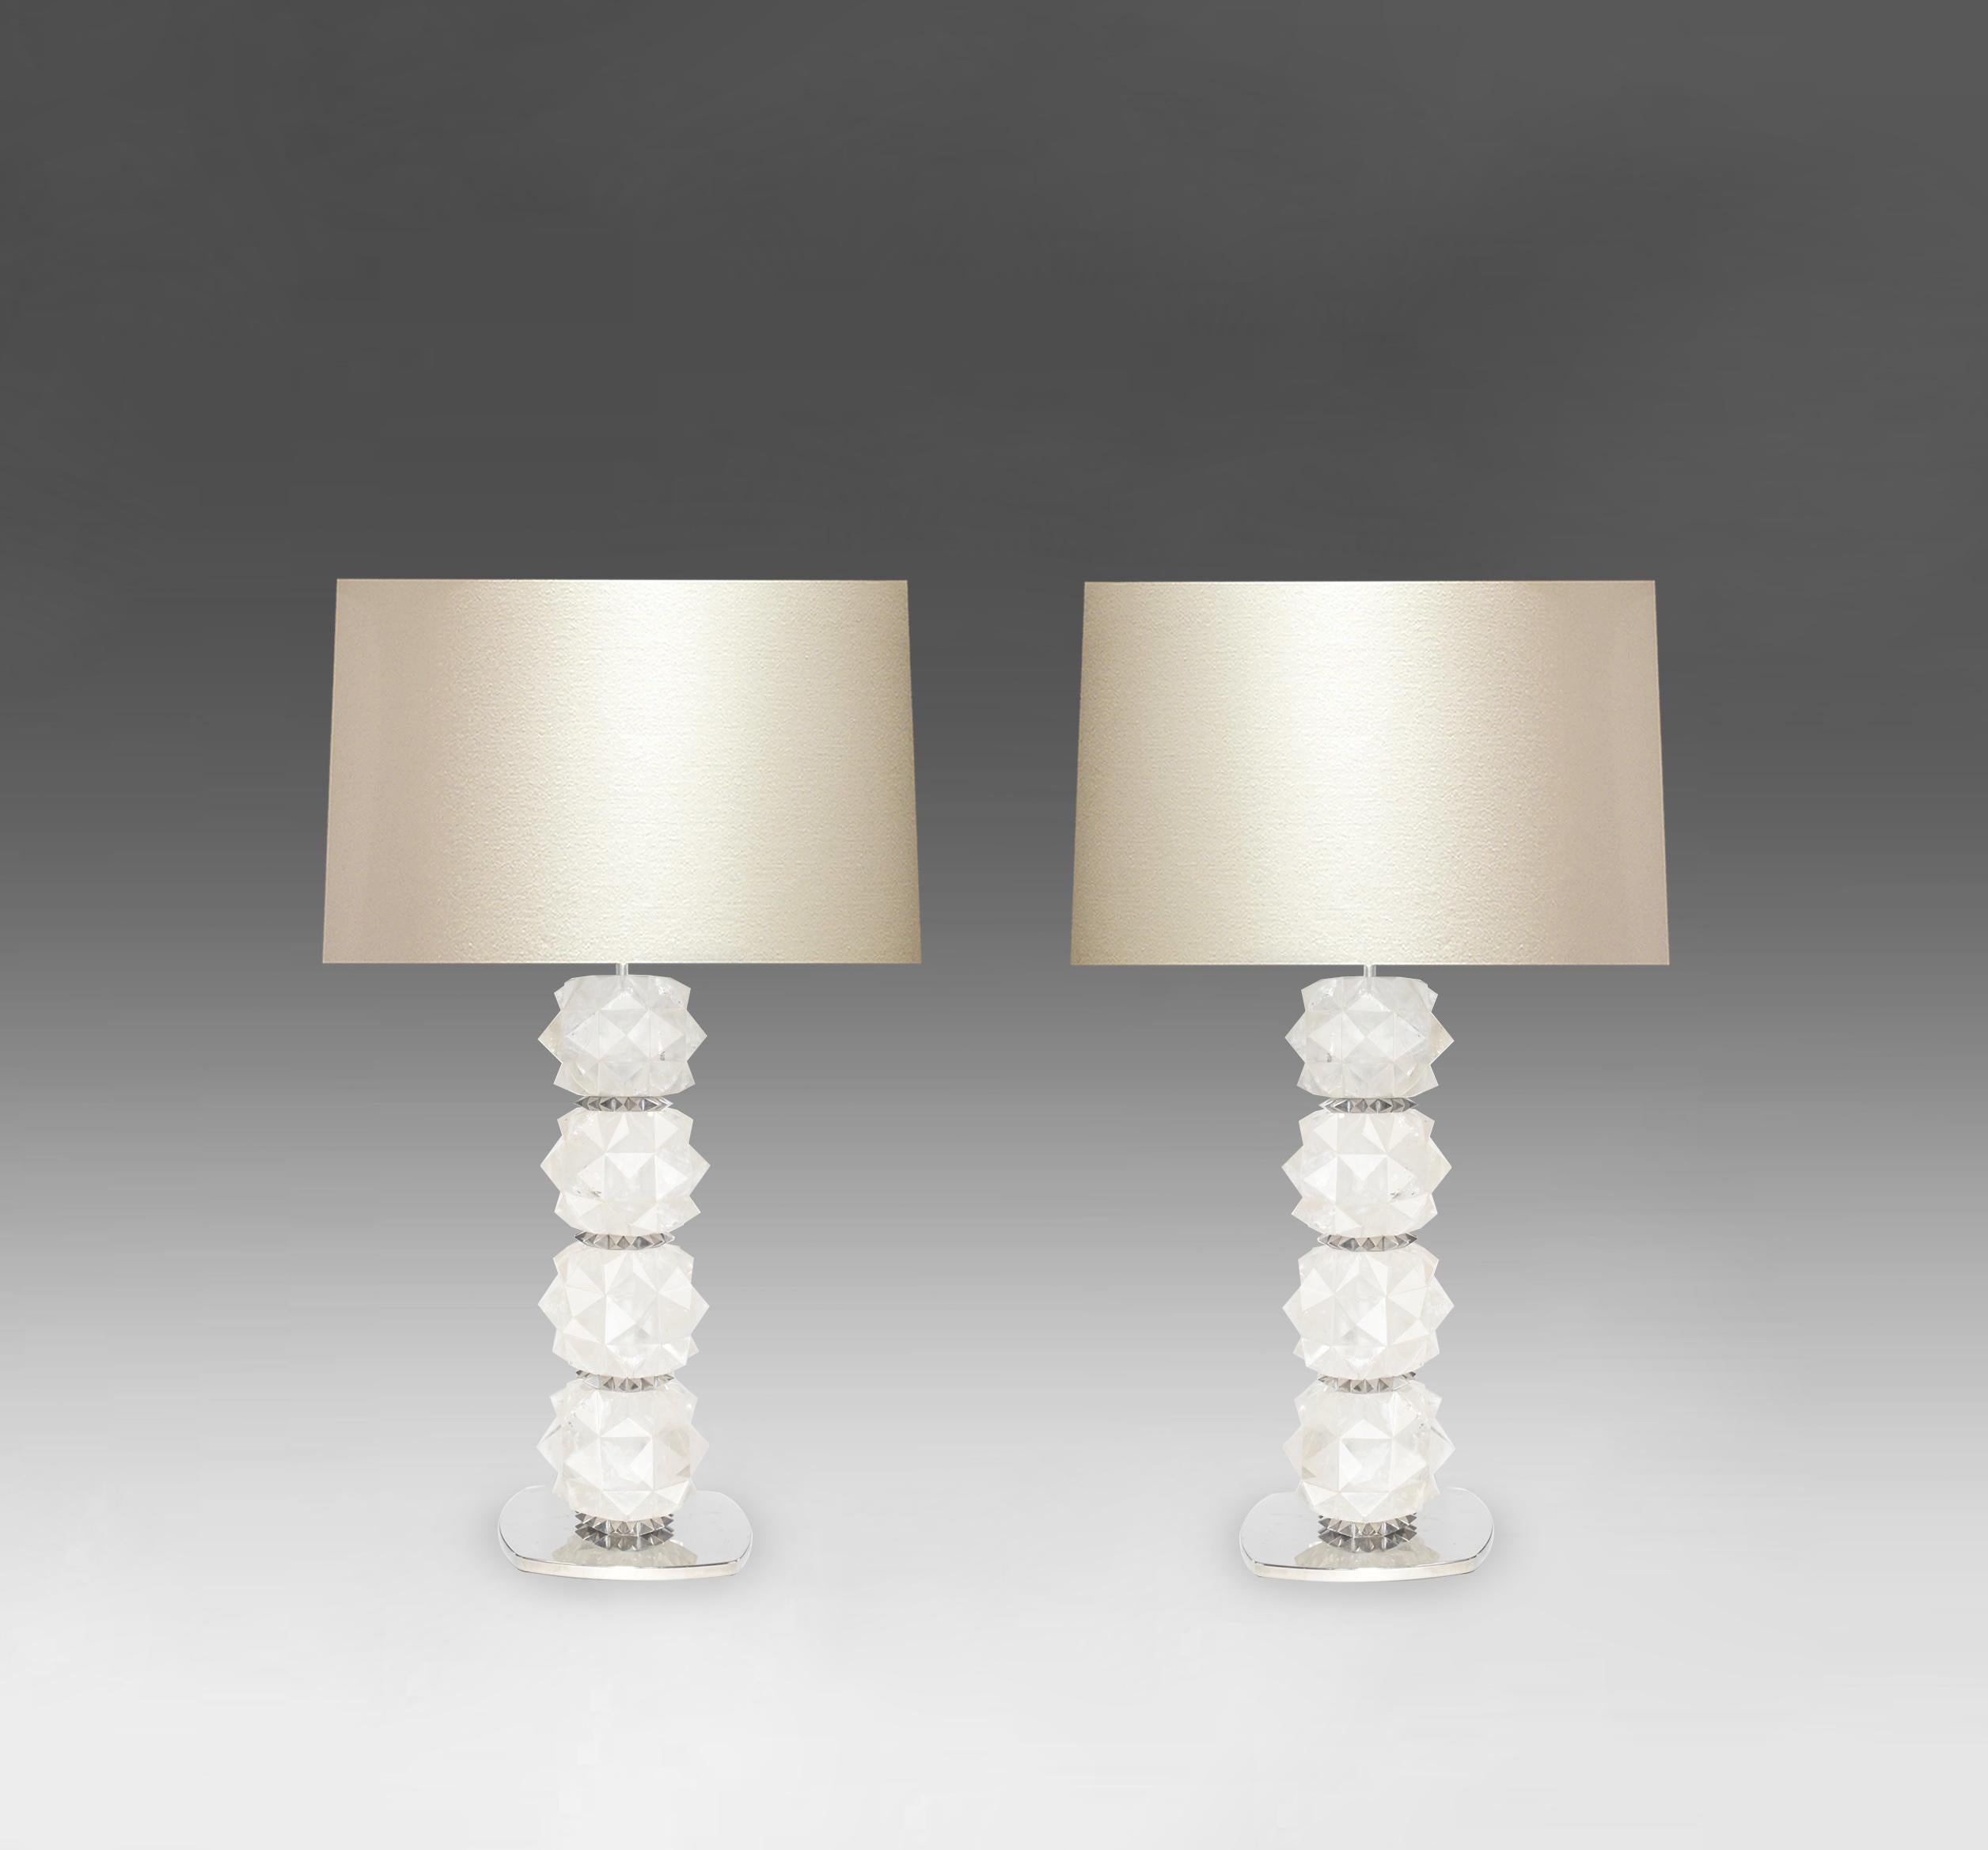 Pair of fine carved faceted rock crystal lamps with nickel plating decoration. Create by Phoenix Gallery, NYC. 
To the top of rock crystal: 16.5